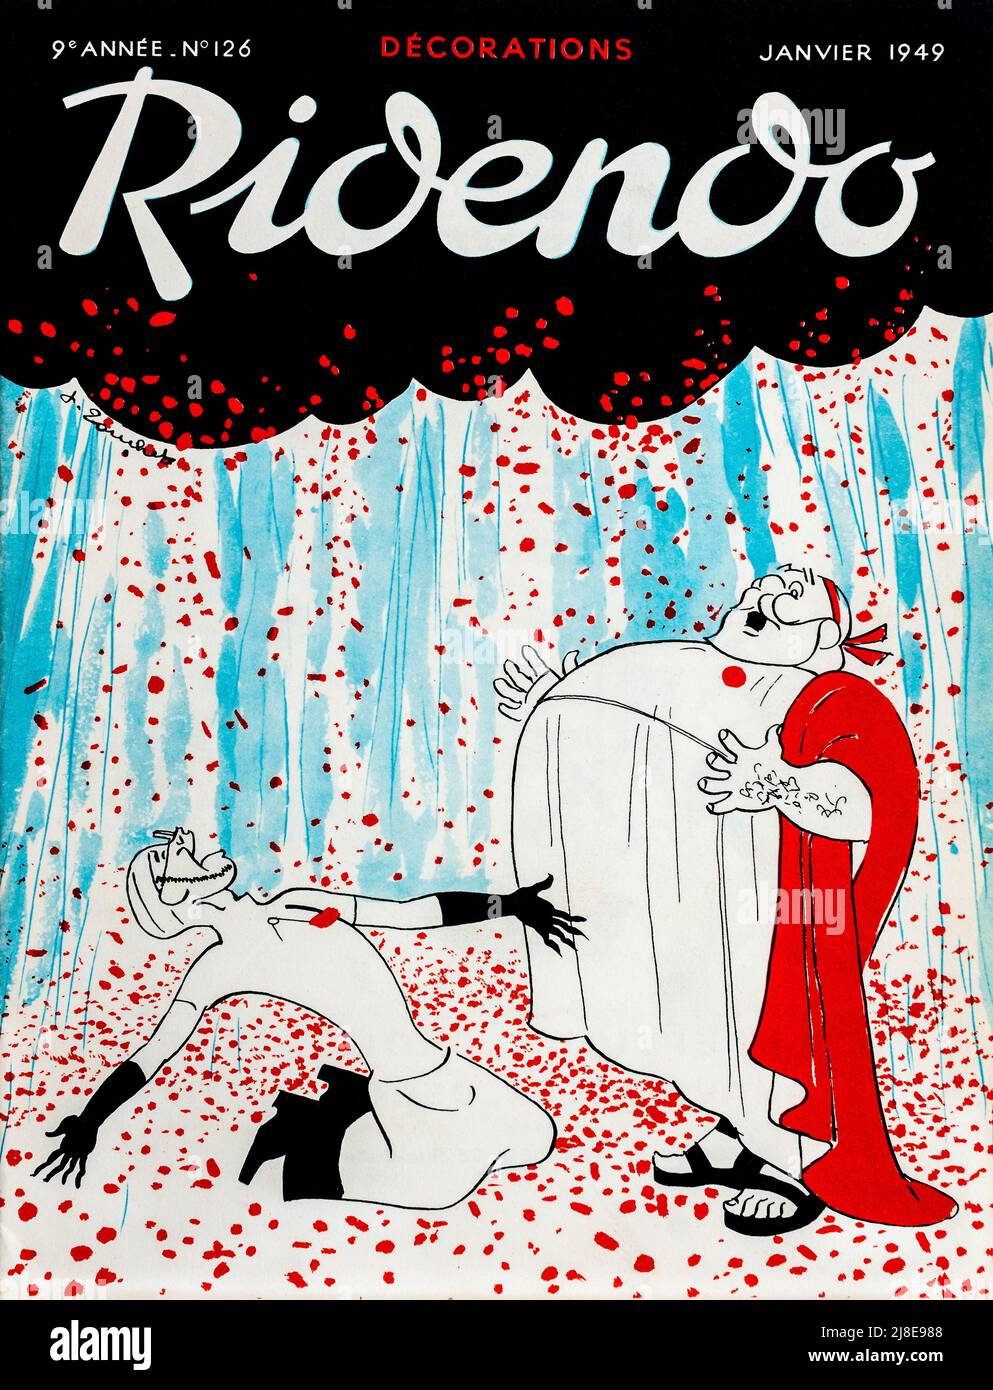 Cover of 'Ridendo' - January 1949, Decorations theme - French monthly humour magazine for doctors and medical workers. Stock Photo